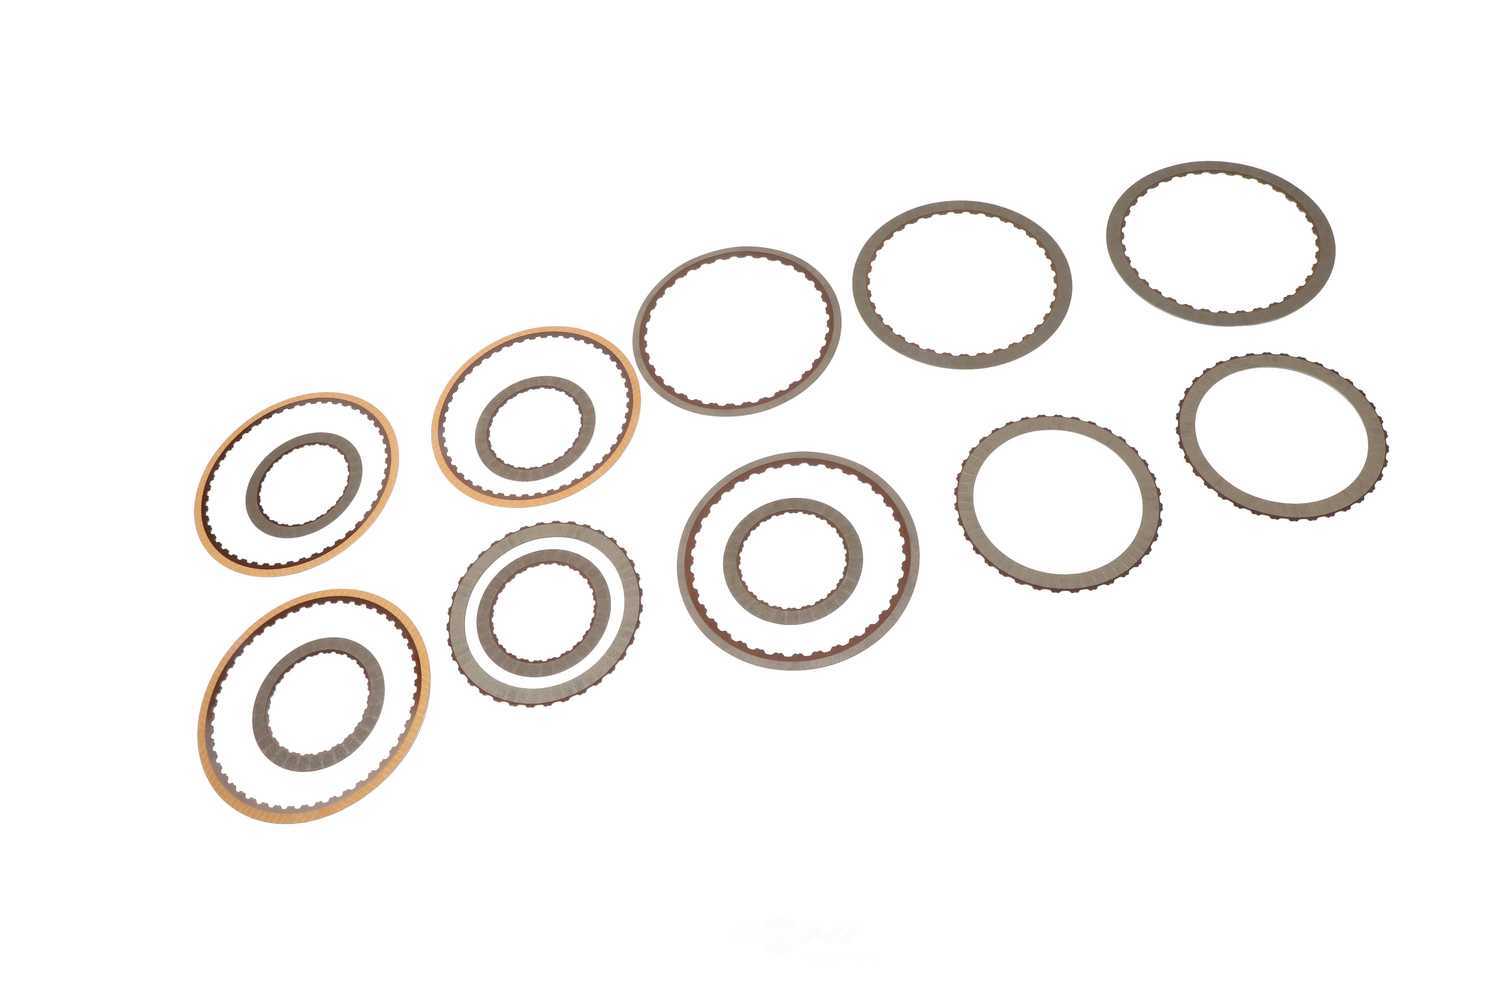 GM GENUINE PARTS - Transmission Clutch Friction Plate Kit - GMP 24273081